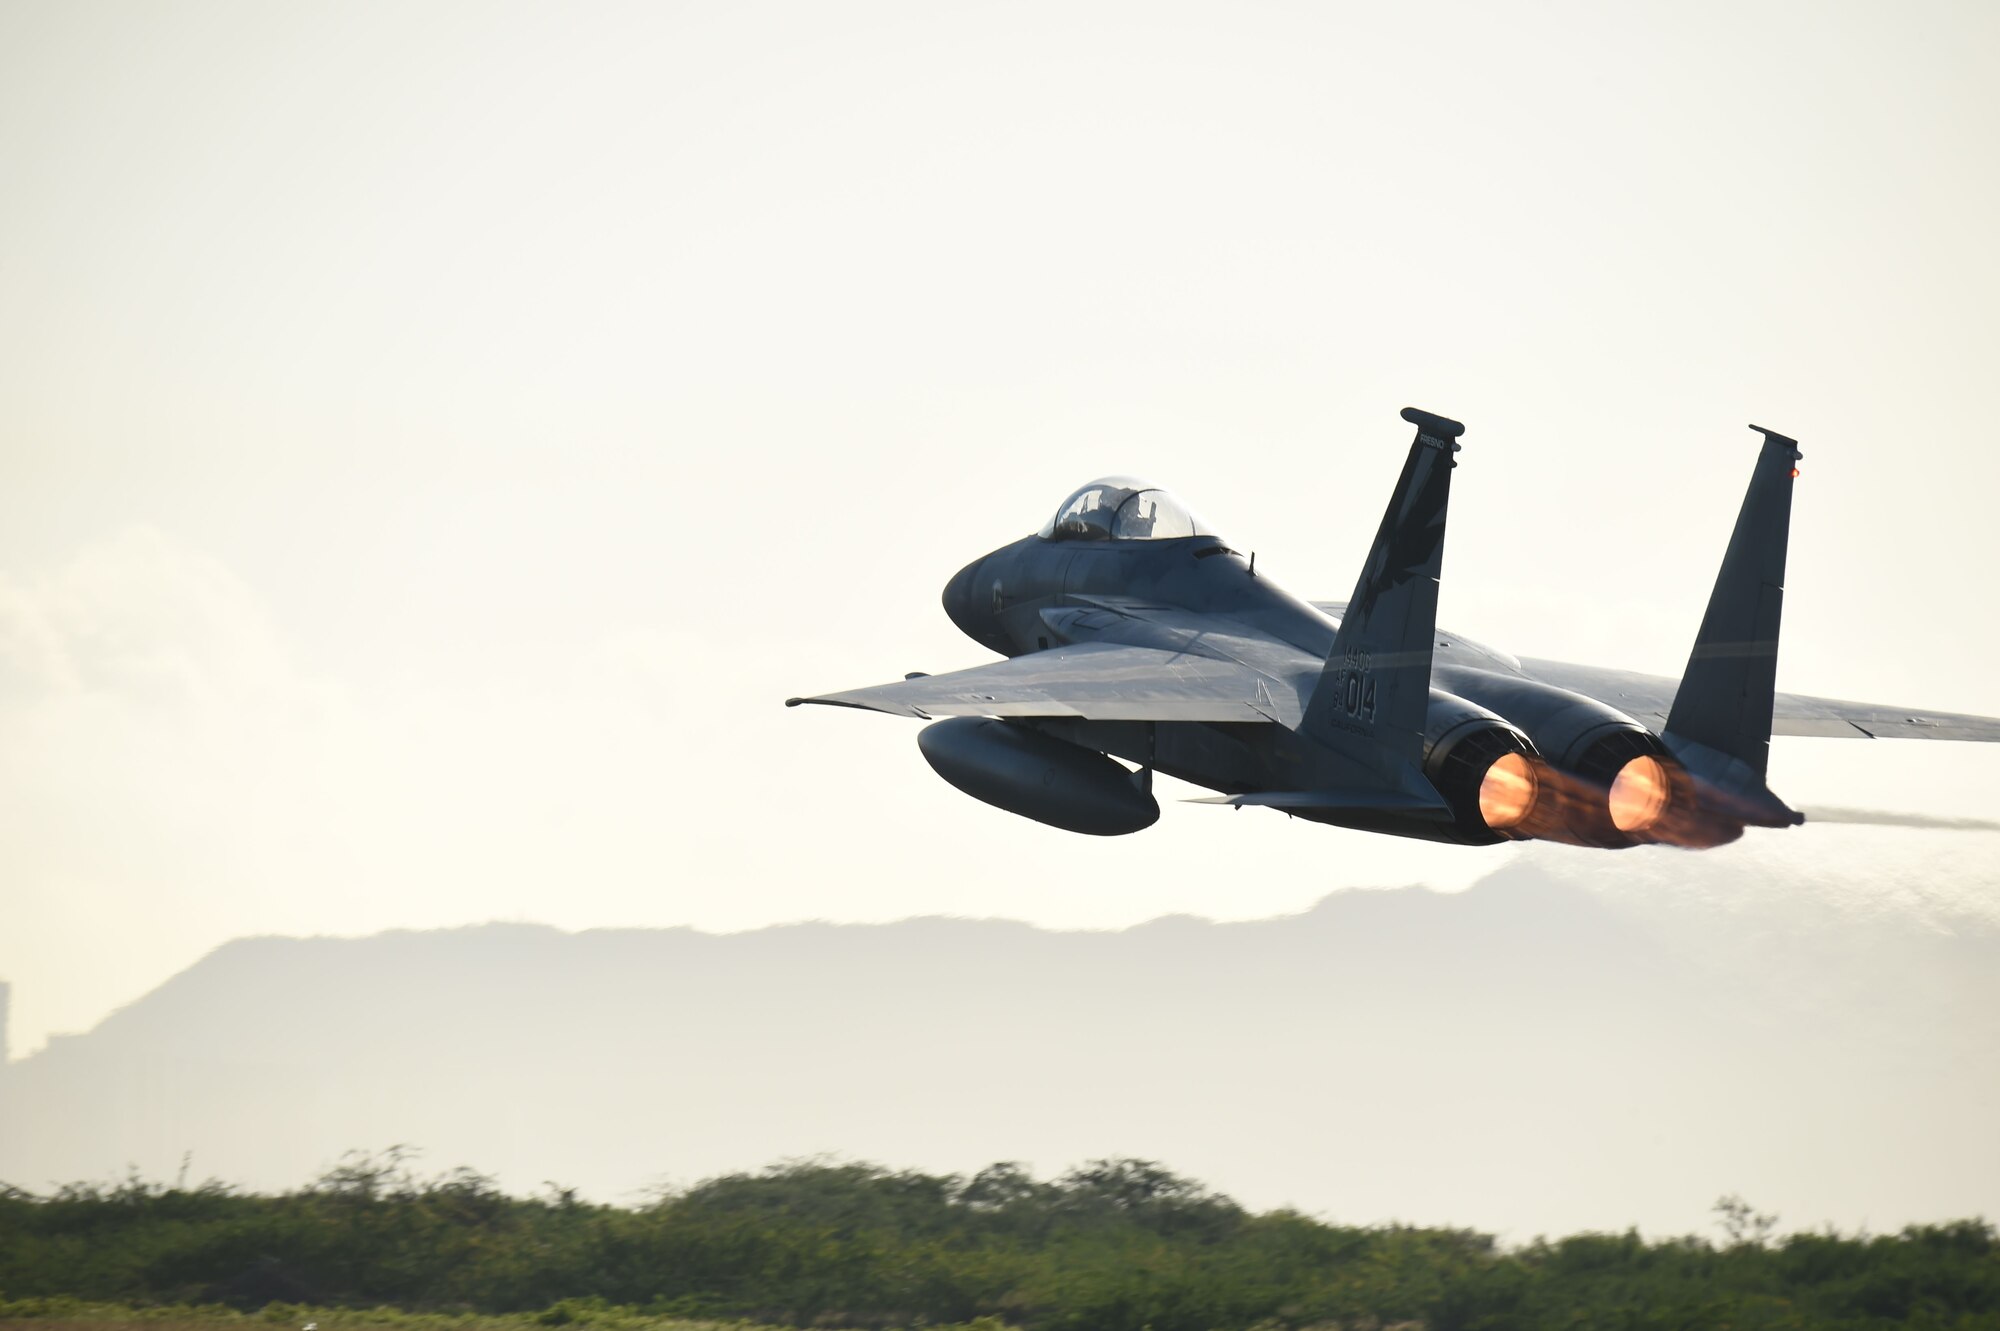 An F-15 Eagle fighter jet from California Air National Guard’s 144th Fighter Wing takes-off for the morning launch during Sentry Aloha 18-01 Jan. 12, 2017, at Joint Base Pearl Harbor-Hickam, Hawaii. Sentry Aloha provides tailored, cost effective and realistic combat training for the Air Force, Air National Guard and other Department of Defense services to provide warfighters with the skill sets necessary to perform their homeland defense and overseas combat missions. (U.S. Air National Guard photo by Senior Master Sgt. Chris Drudge)